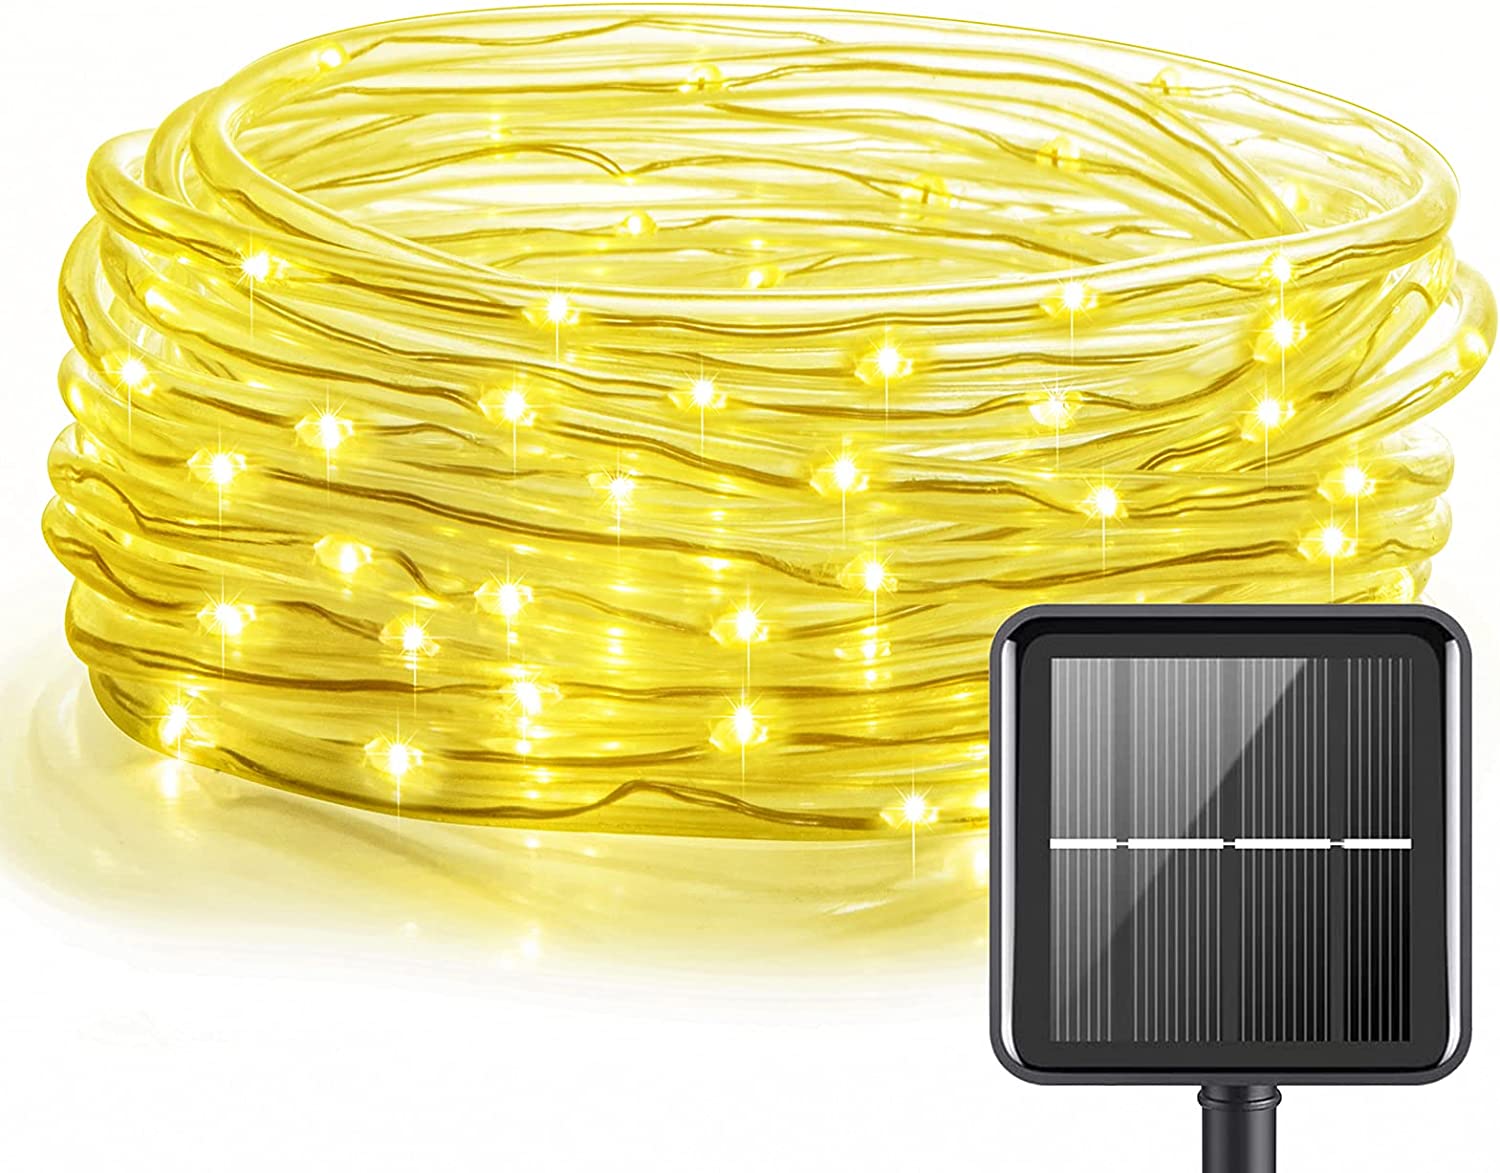 Ooklee Solar Rope String Lights Outdoor Waterproof, 33 FT 100 LED 8 Modes Fairy Lights PVC Tube Lights for Garden Fence, Gazebo, Patio Party, Weddings Pathway, Christmas Tree Decor(Warm White)